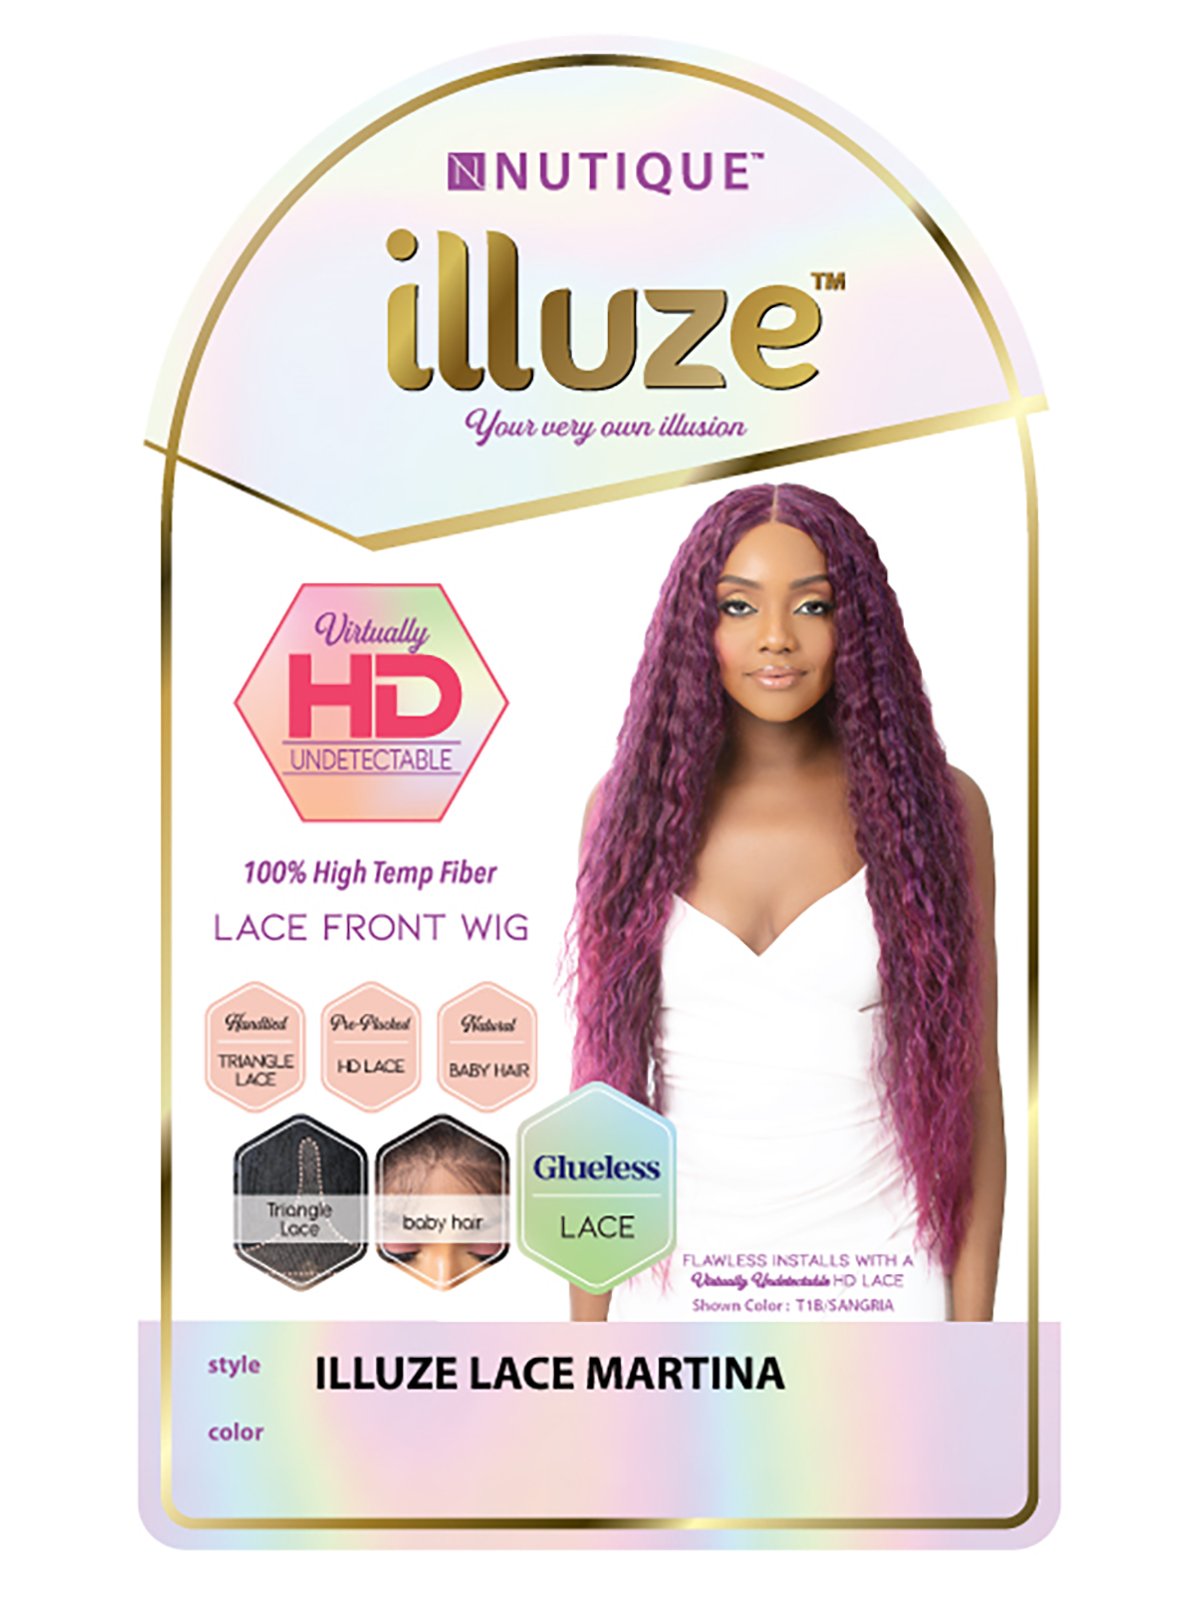 It's a Wig - Nutique Illuze HD lace Front Wig Synthetic Hair MARTINA